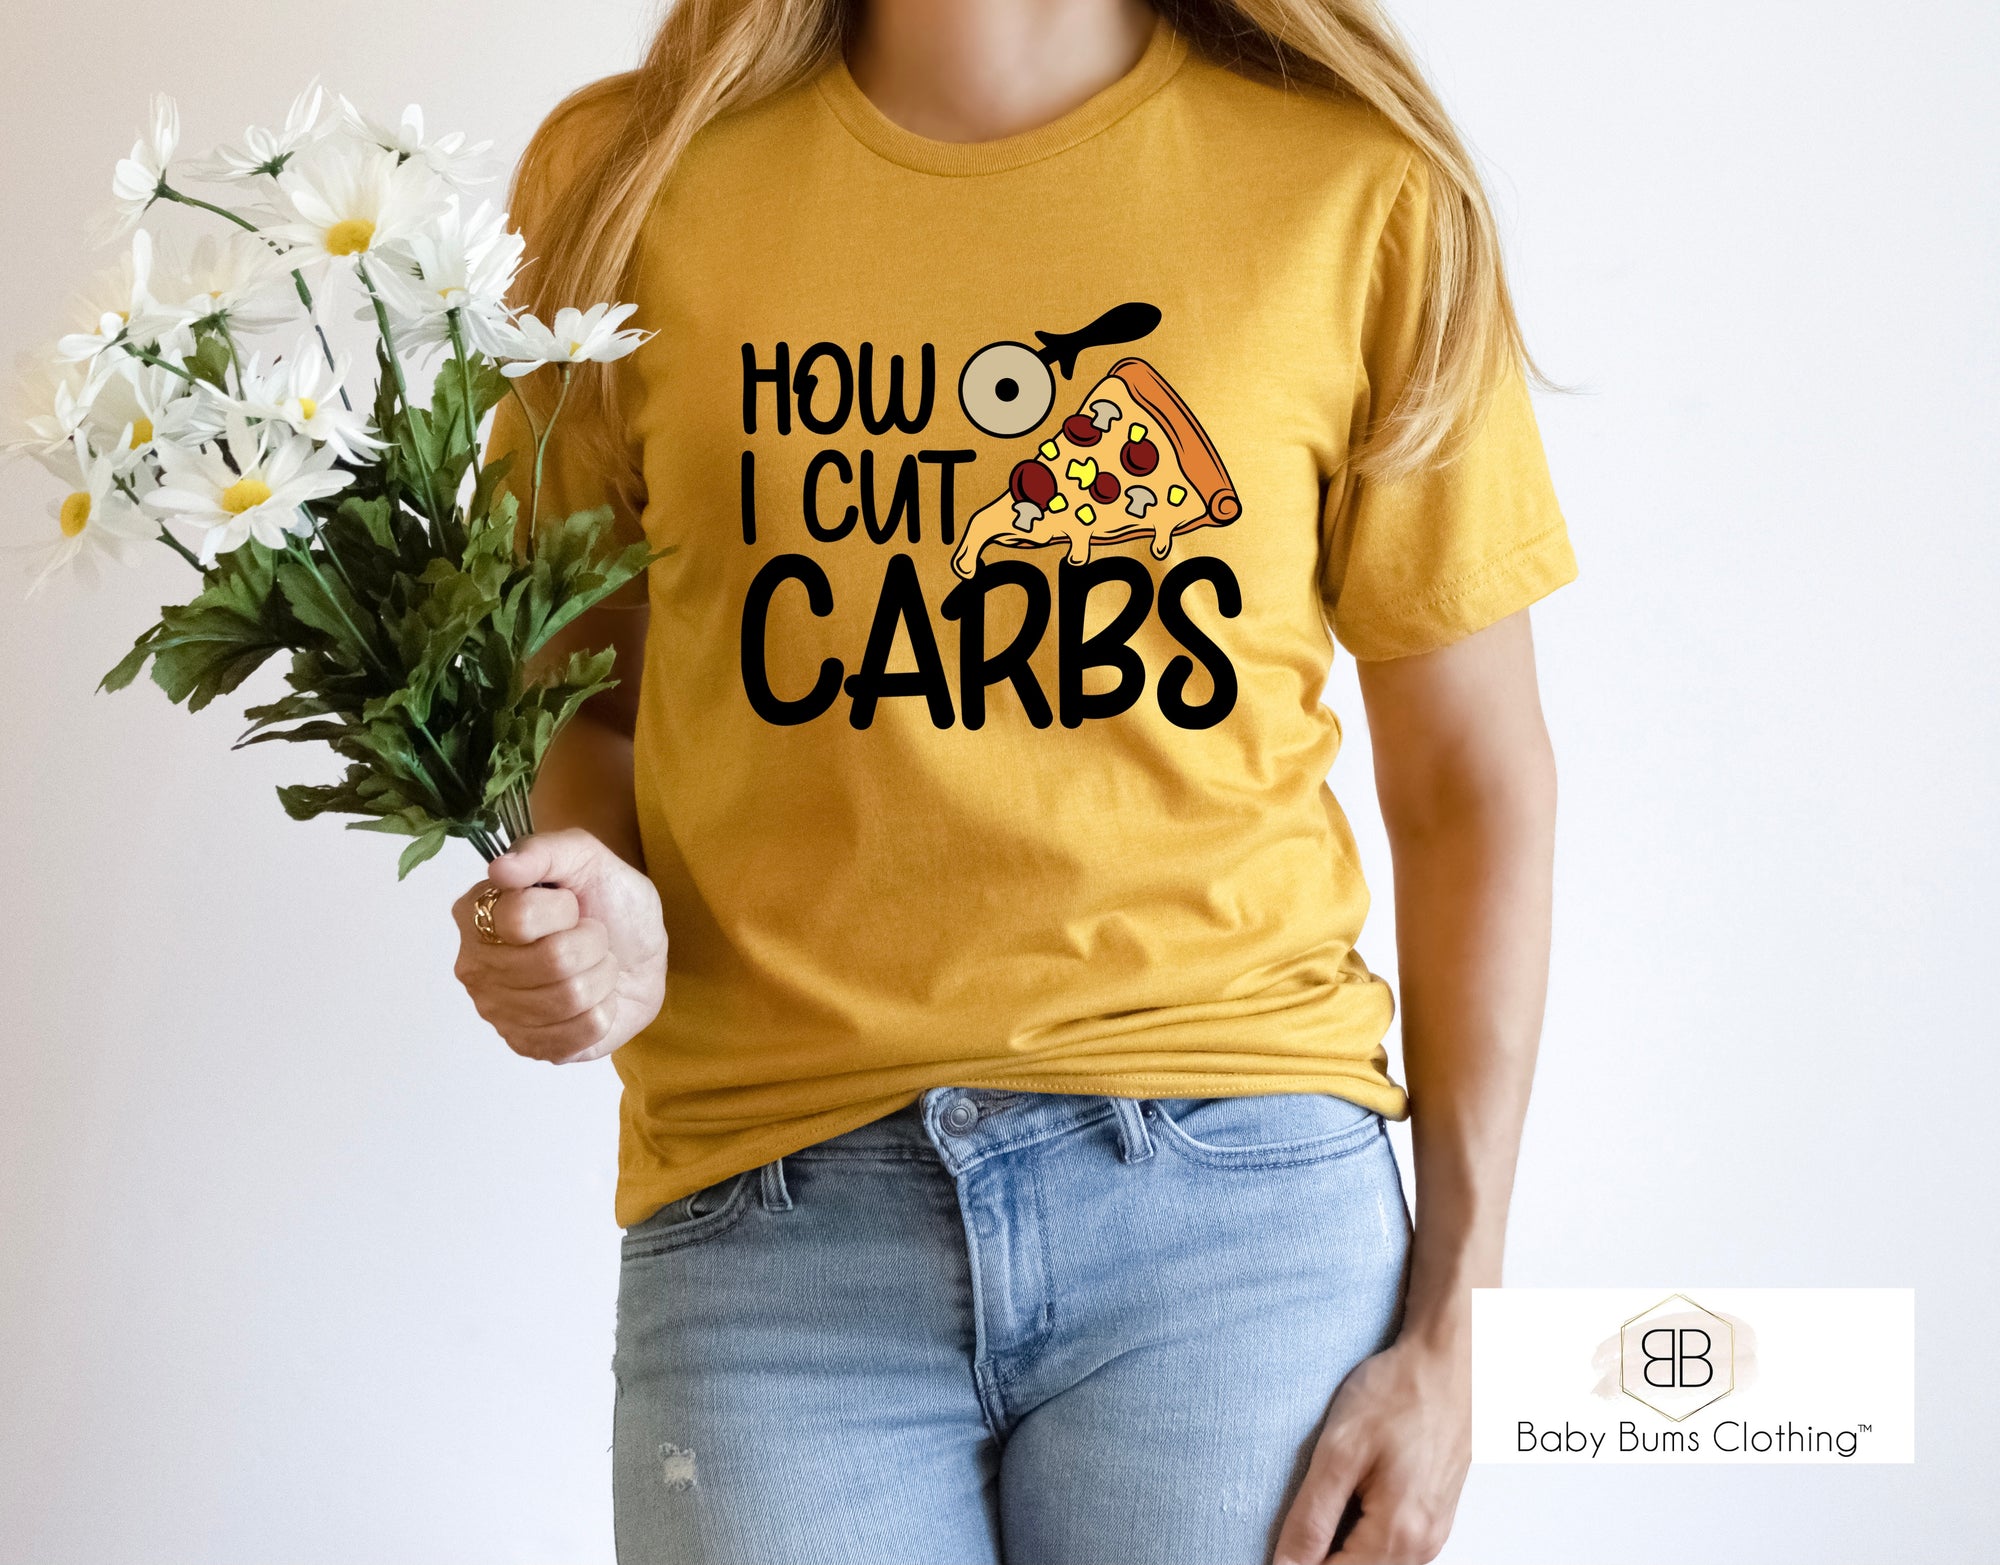 CUTTING CARBS ADULT UNISEX T-SHIRT - Baby Bums Clothing 